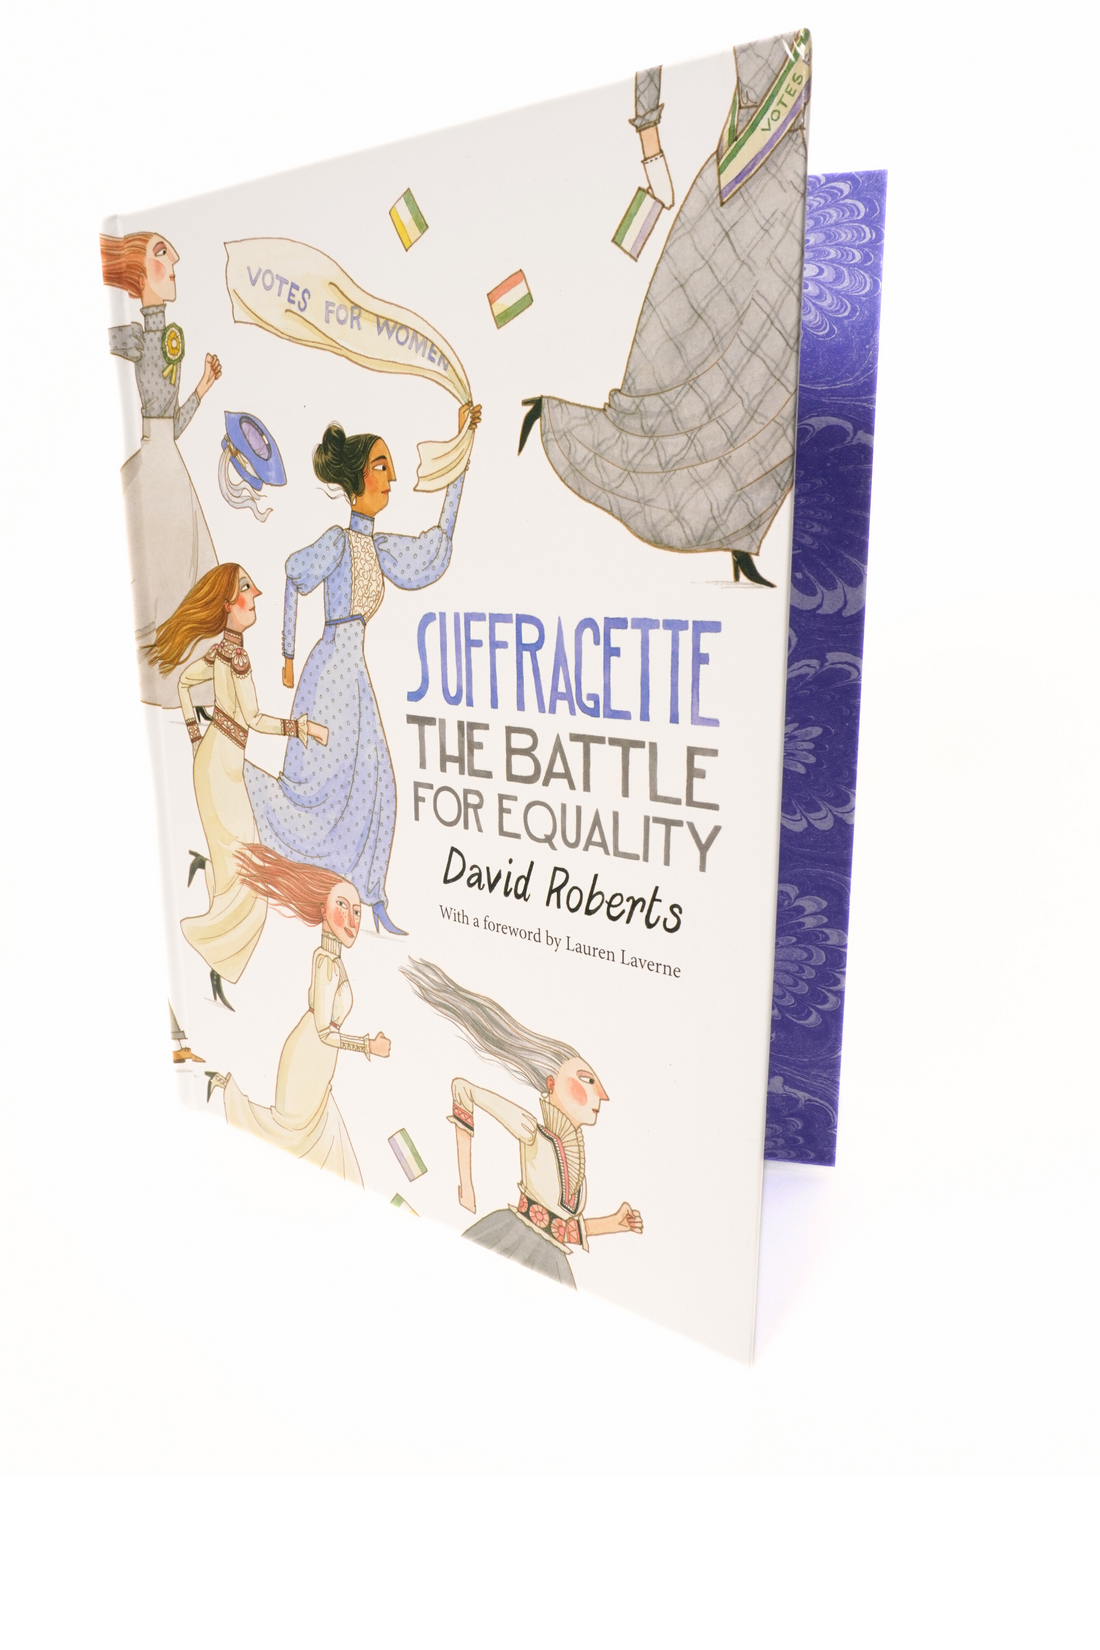 Suffragette: The Battle for Equality